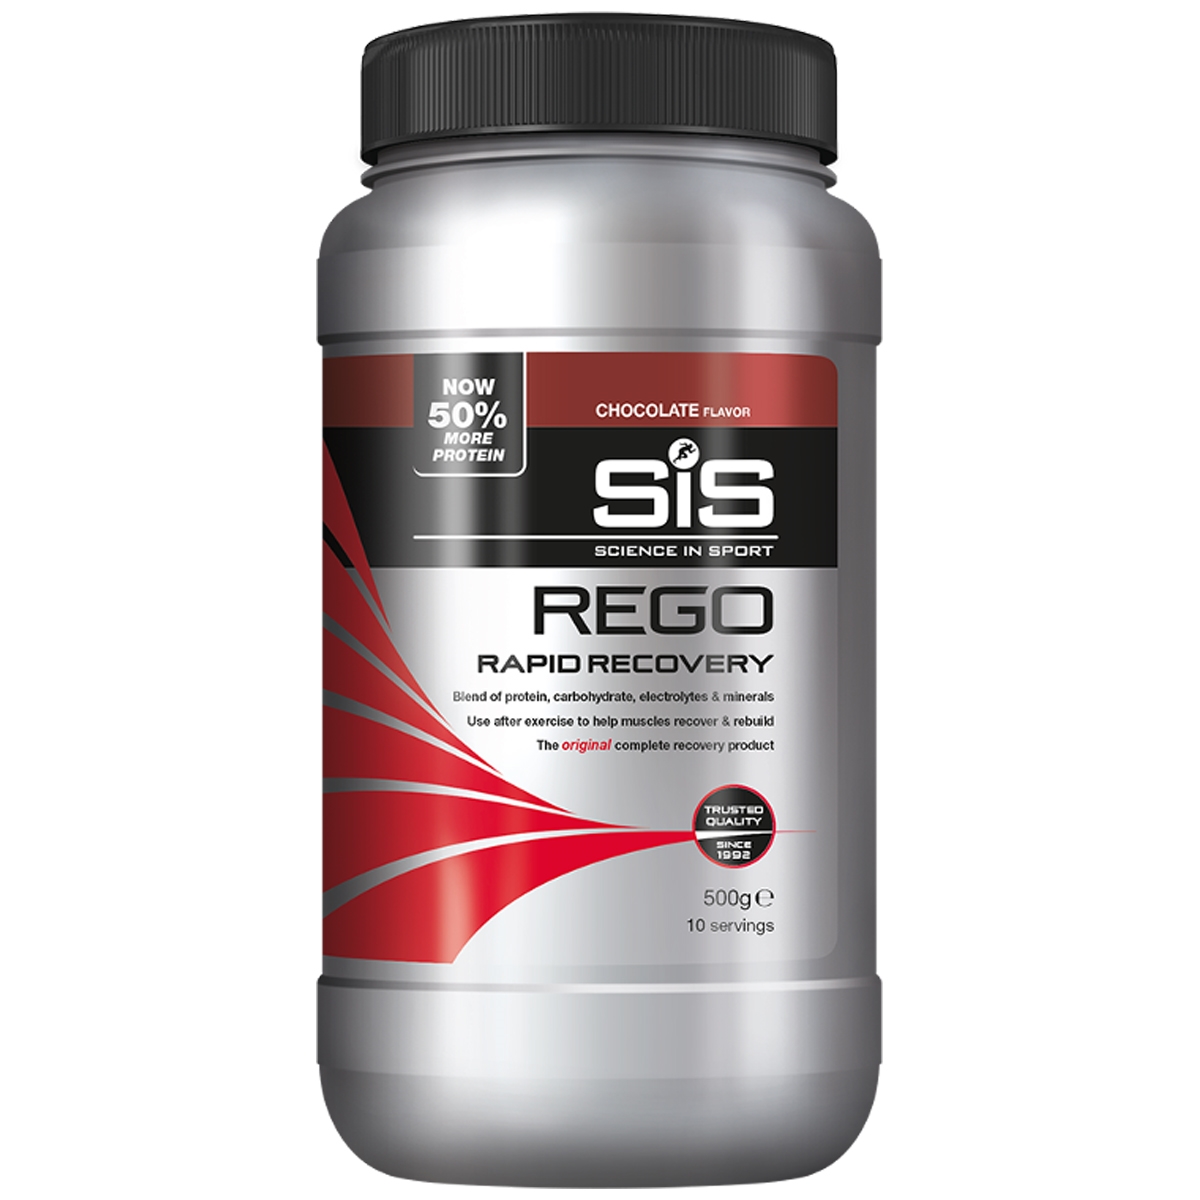 Rego Rapid Recovery Drink Chocolate Flavor 500g